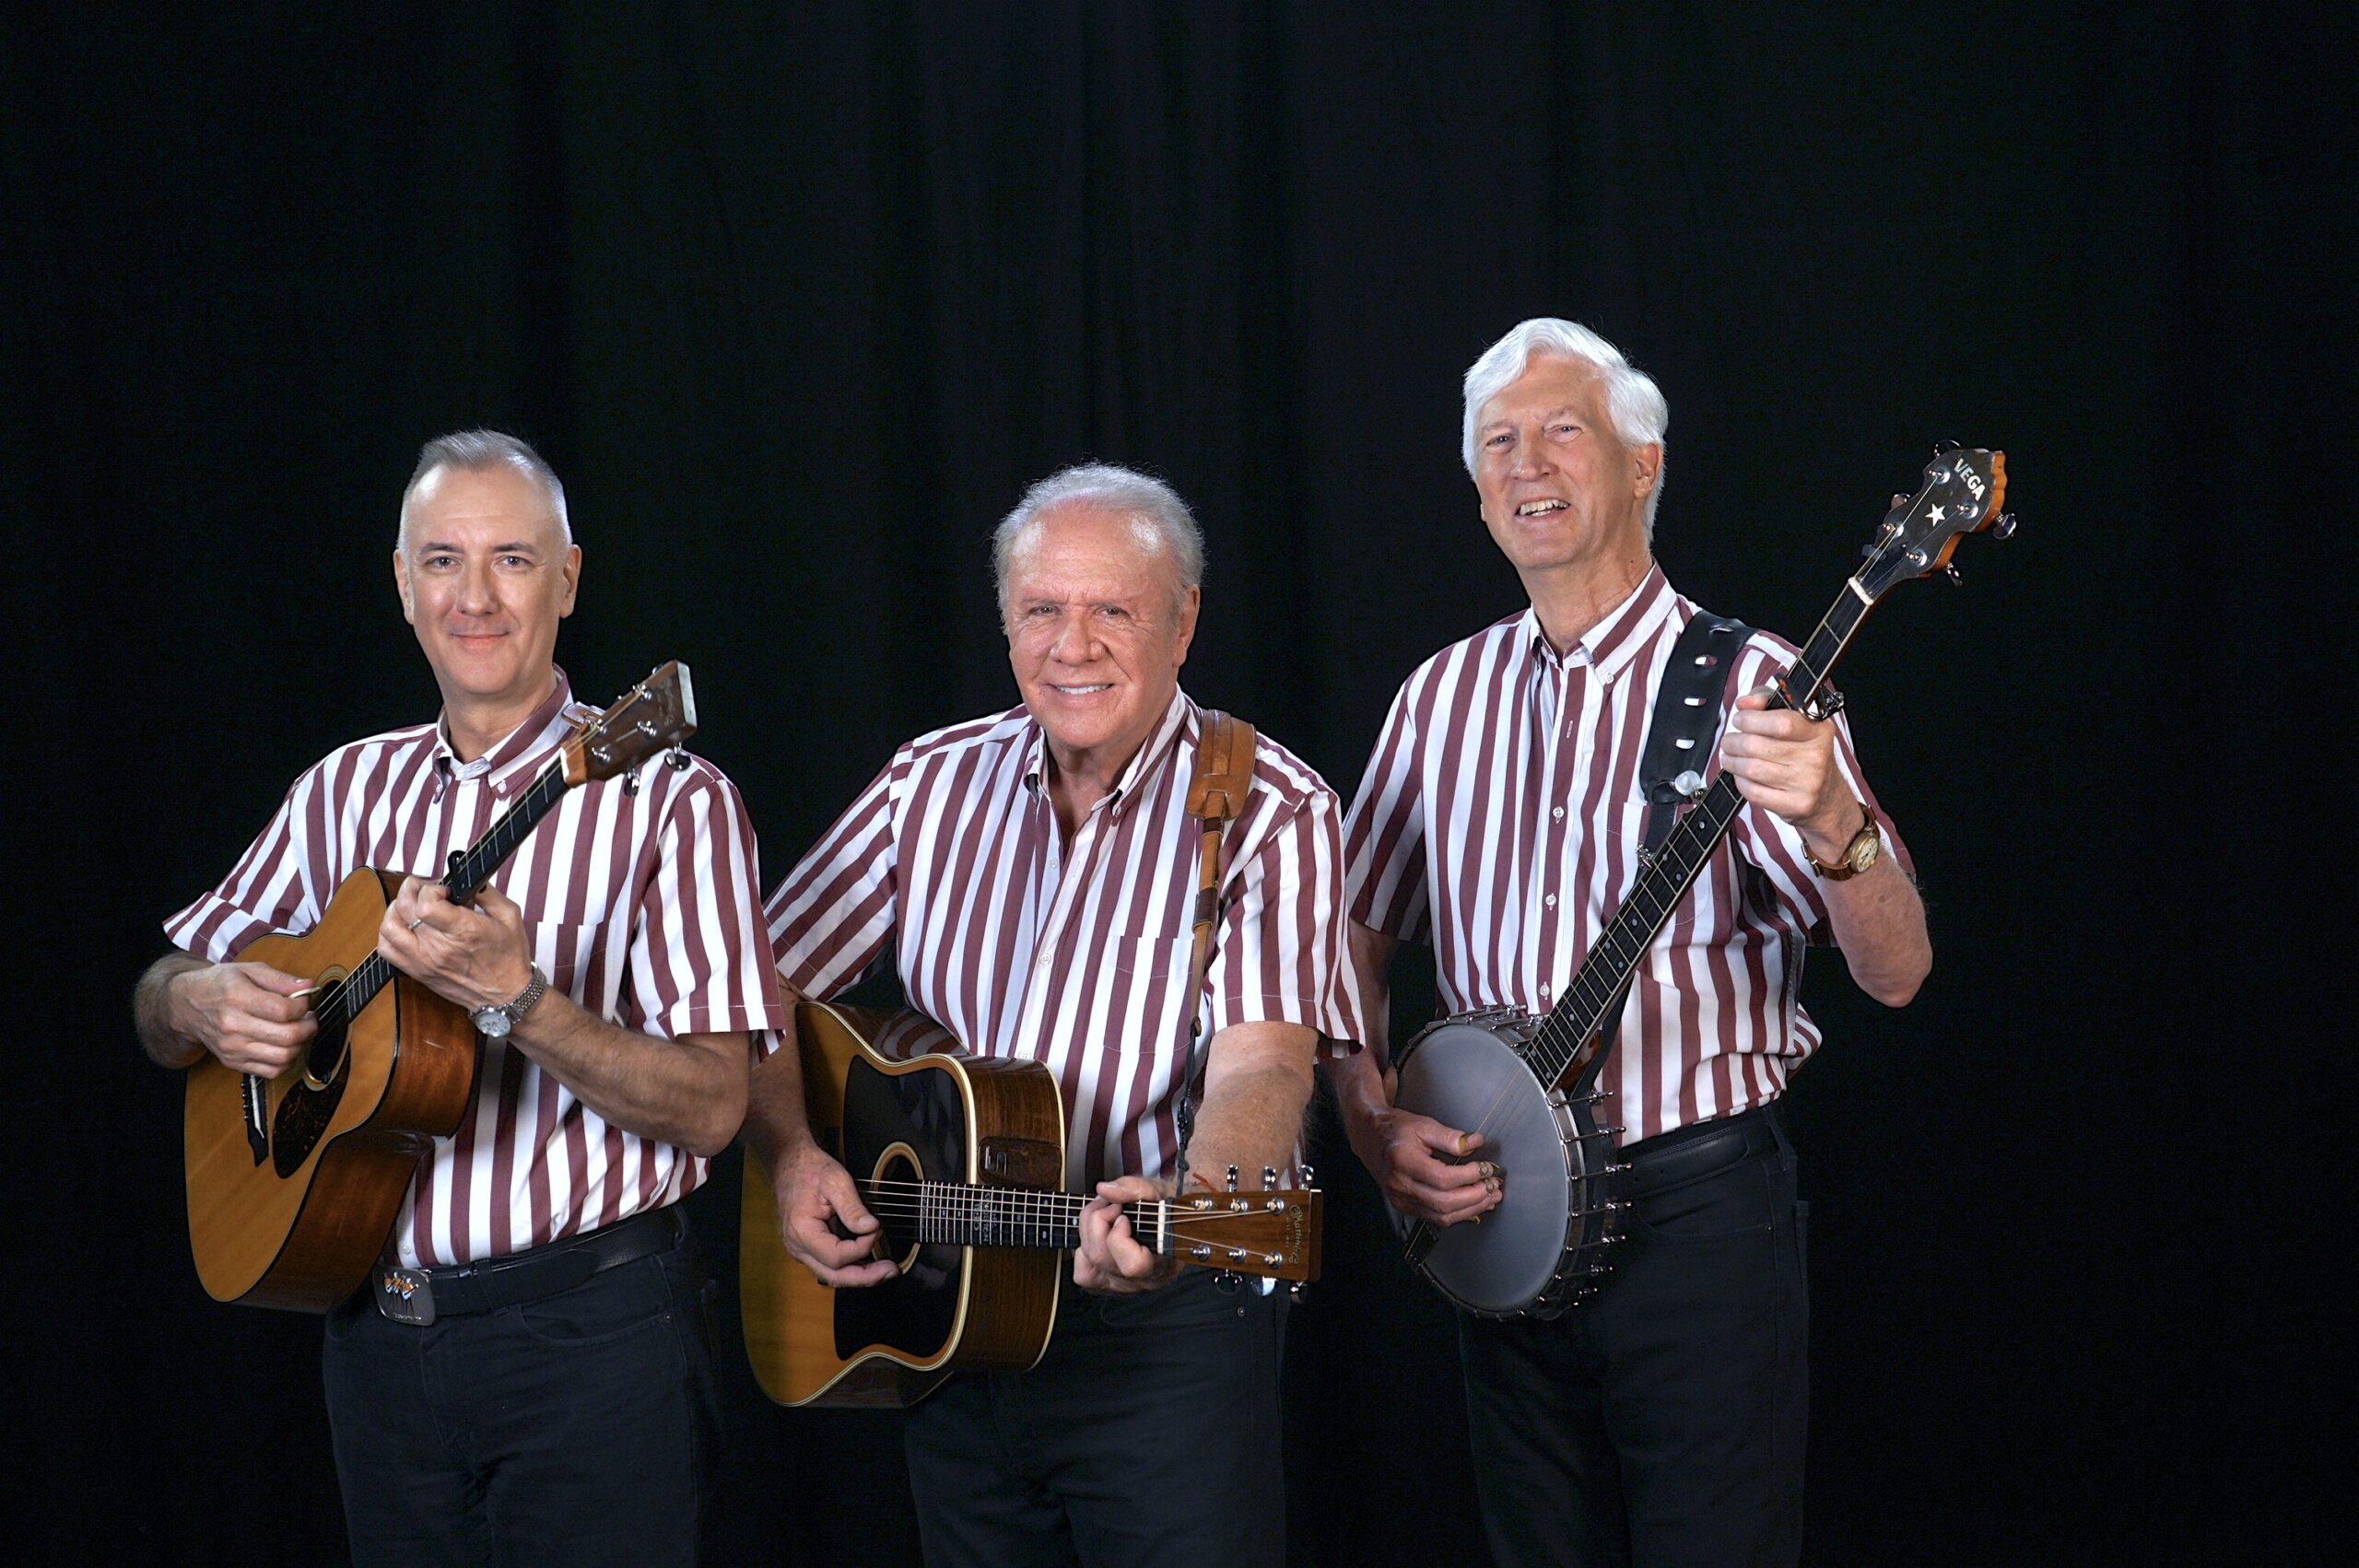 Shows a photo of The Kingston Trio